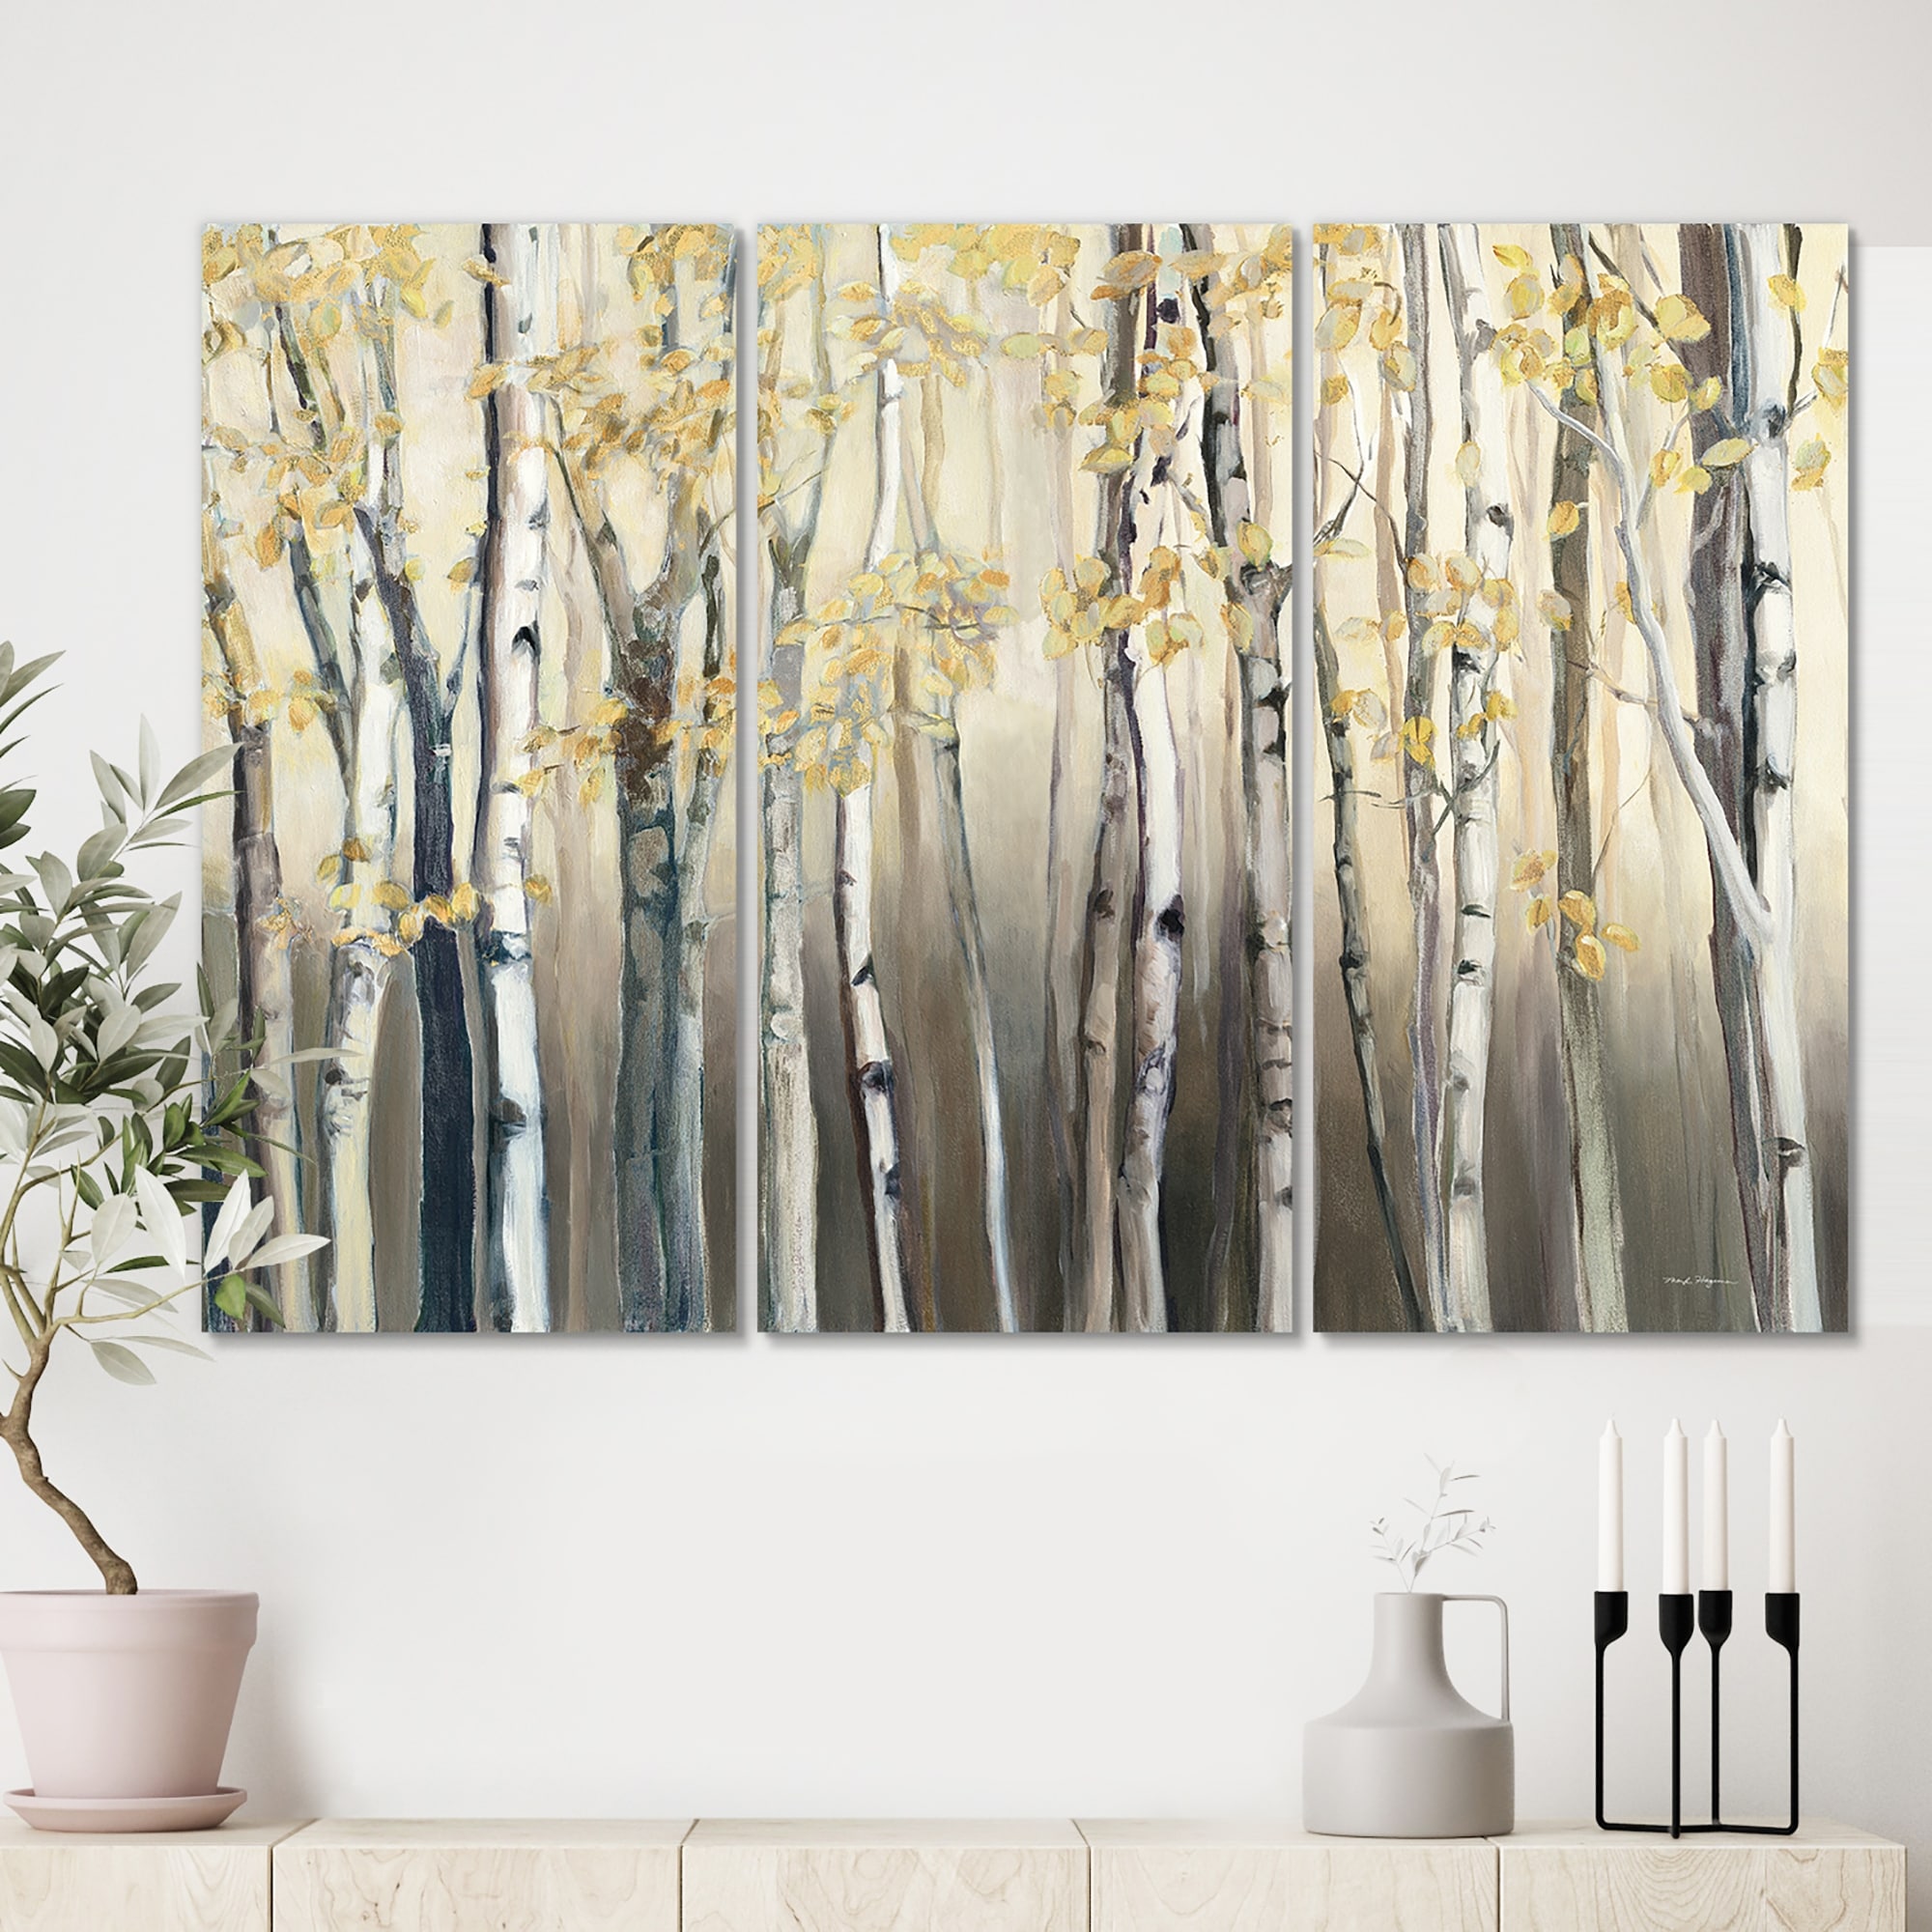 Birch Tree Autumn view Fashion Canvas Poster Abstract Art Painting For Living Room Home Decor luxury Art 3 sets of golden Aspen shadows